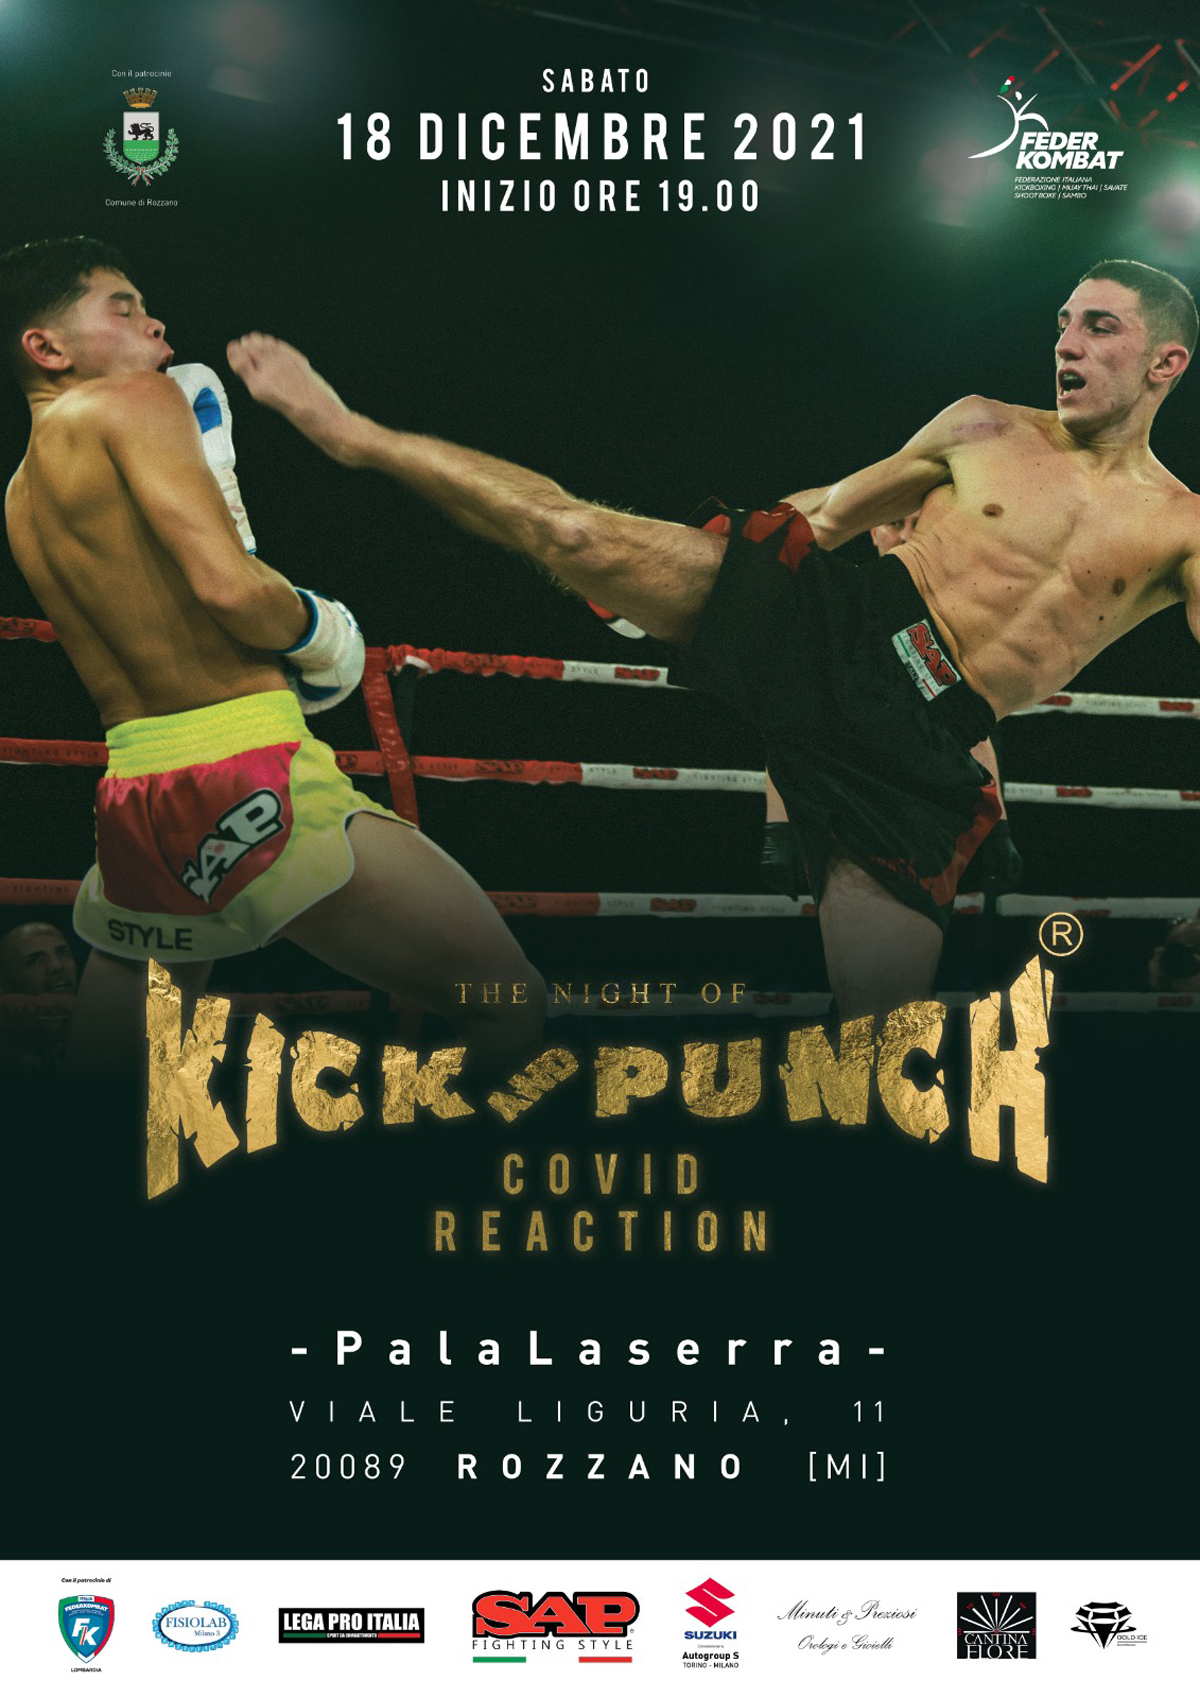 The Night of Kick and Punch 2021